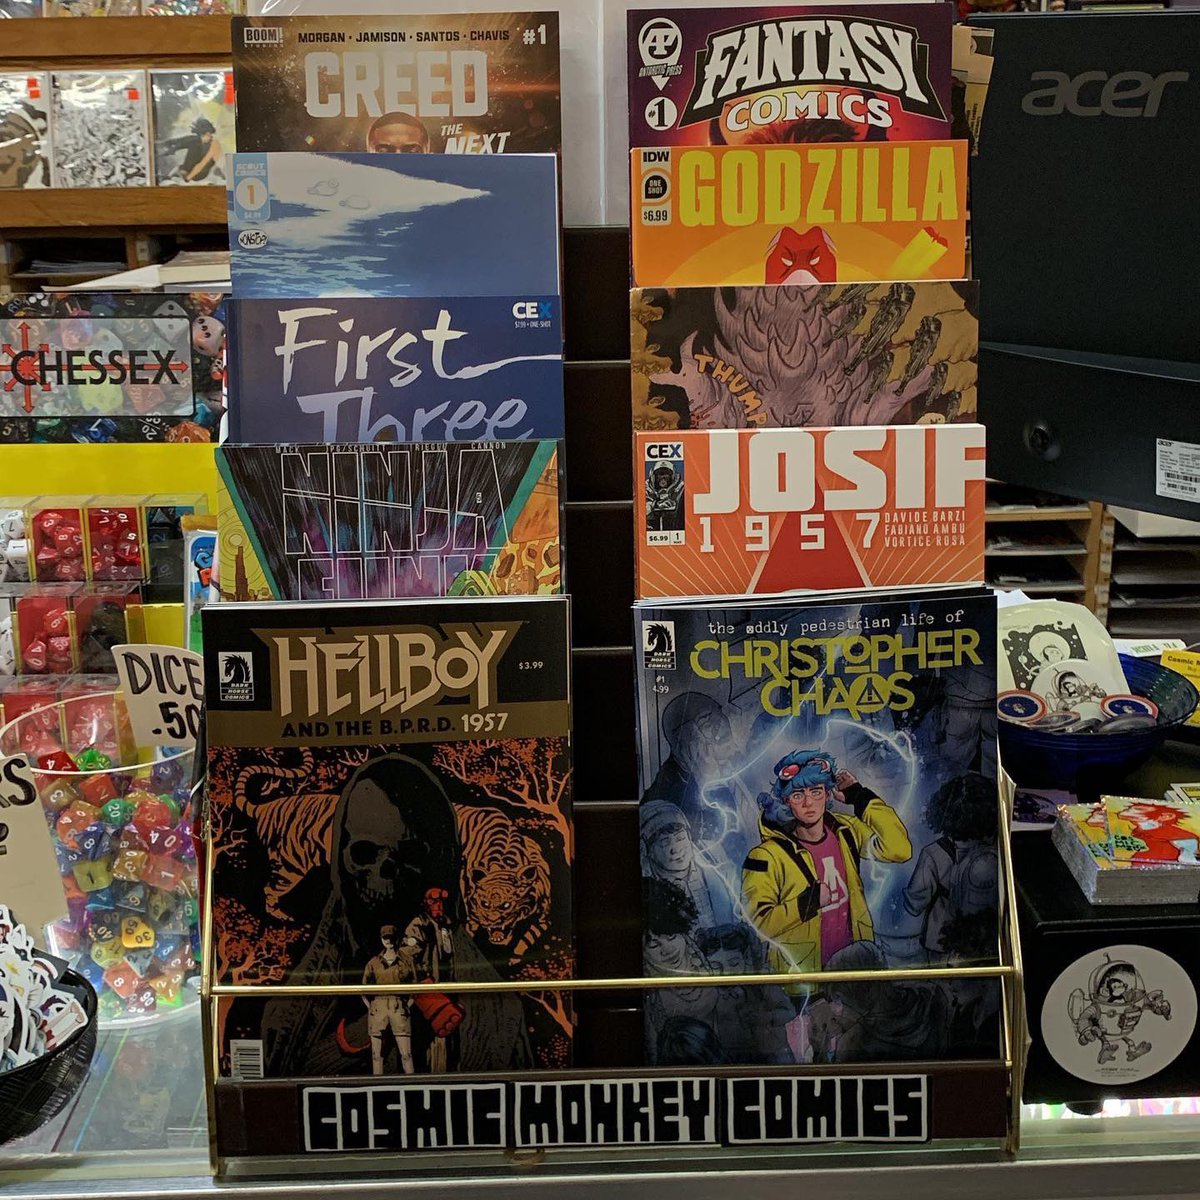 It’s nice to see no new Marvel and DC #1s for once. Some of these titles have names longer than a contemporary Manga title. #hellboyandthebprd1957fearfulsymmetry #theoddlypedestrianlifeofchristopherchaos #ninjafunk #josif1957 #firstthree #diabolicaladoublefeatureofcomixbedlam